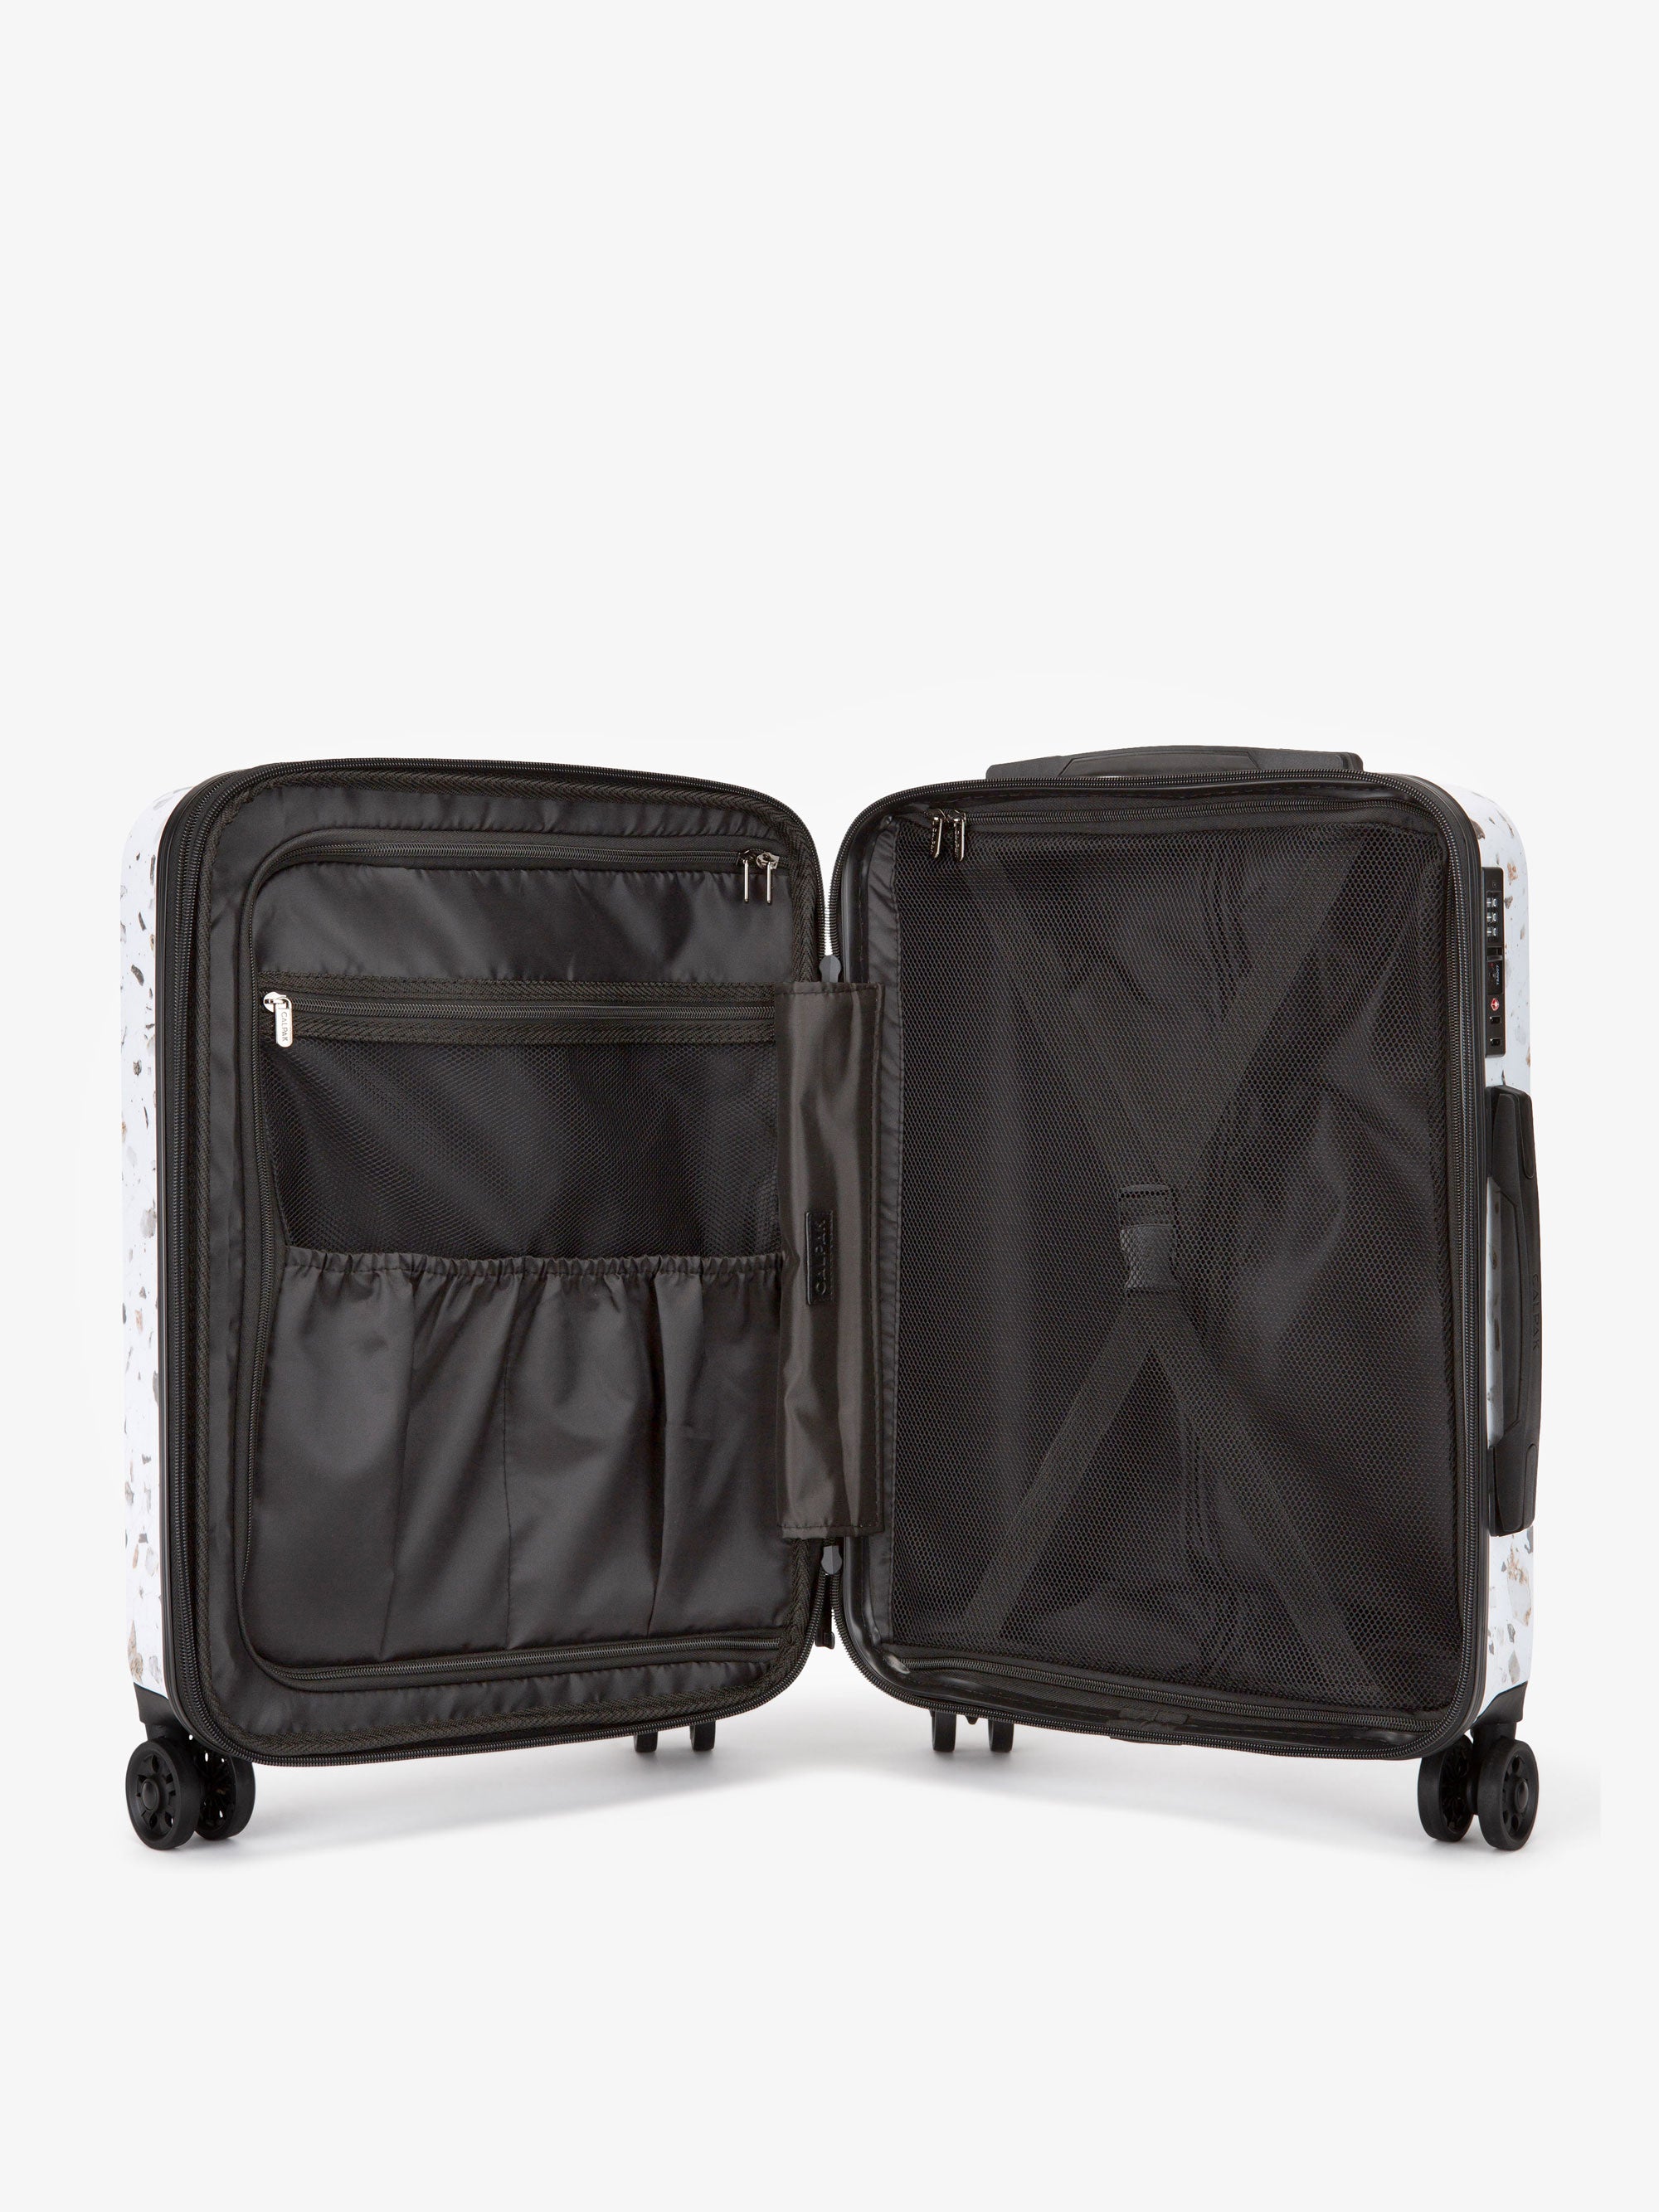 interior of CALPAK hard shell Terrazzo carry-on luggage with compression straps